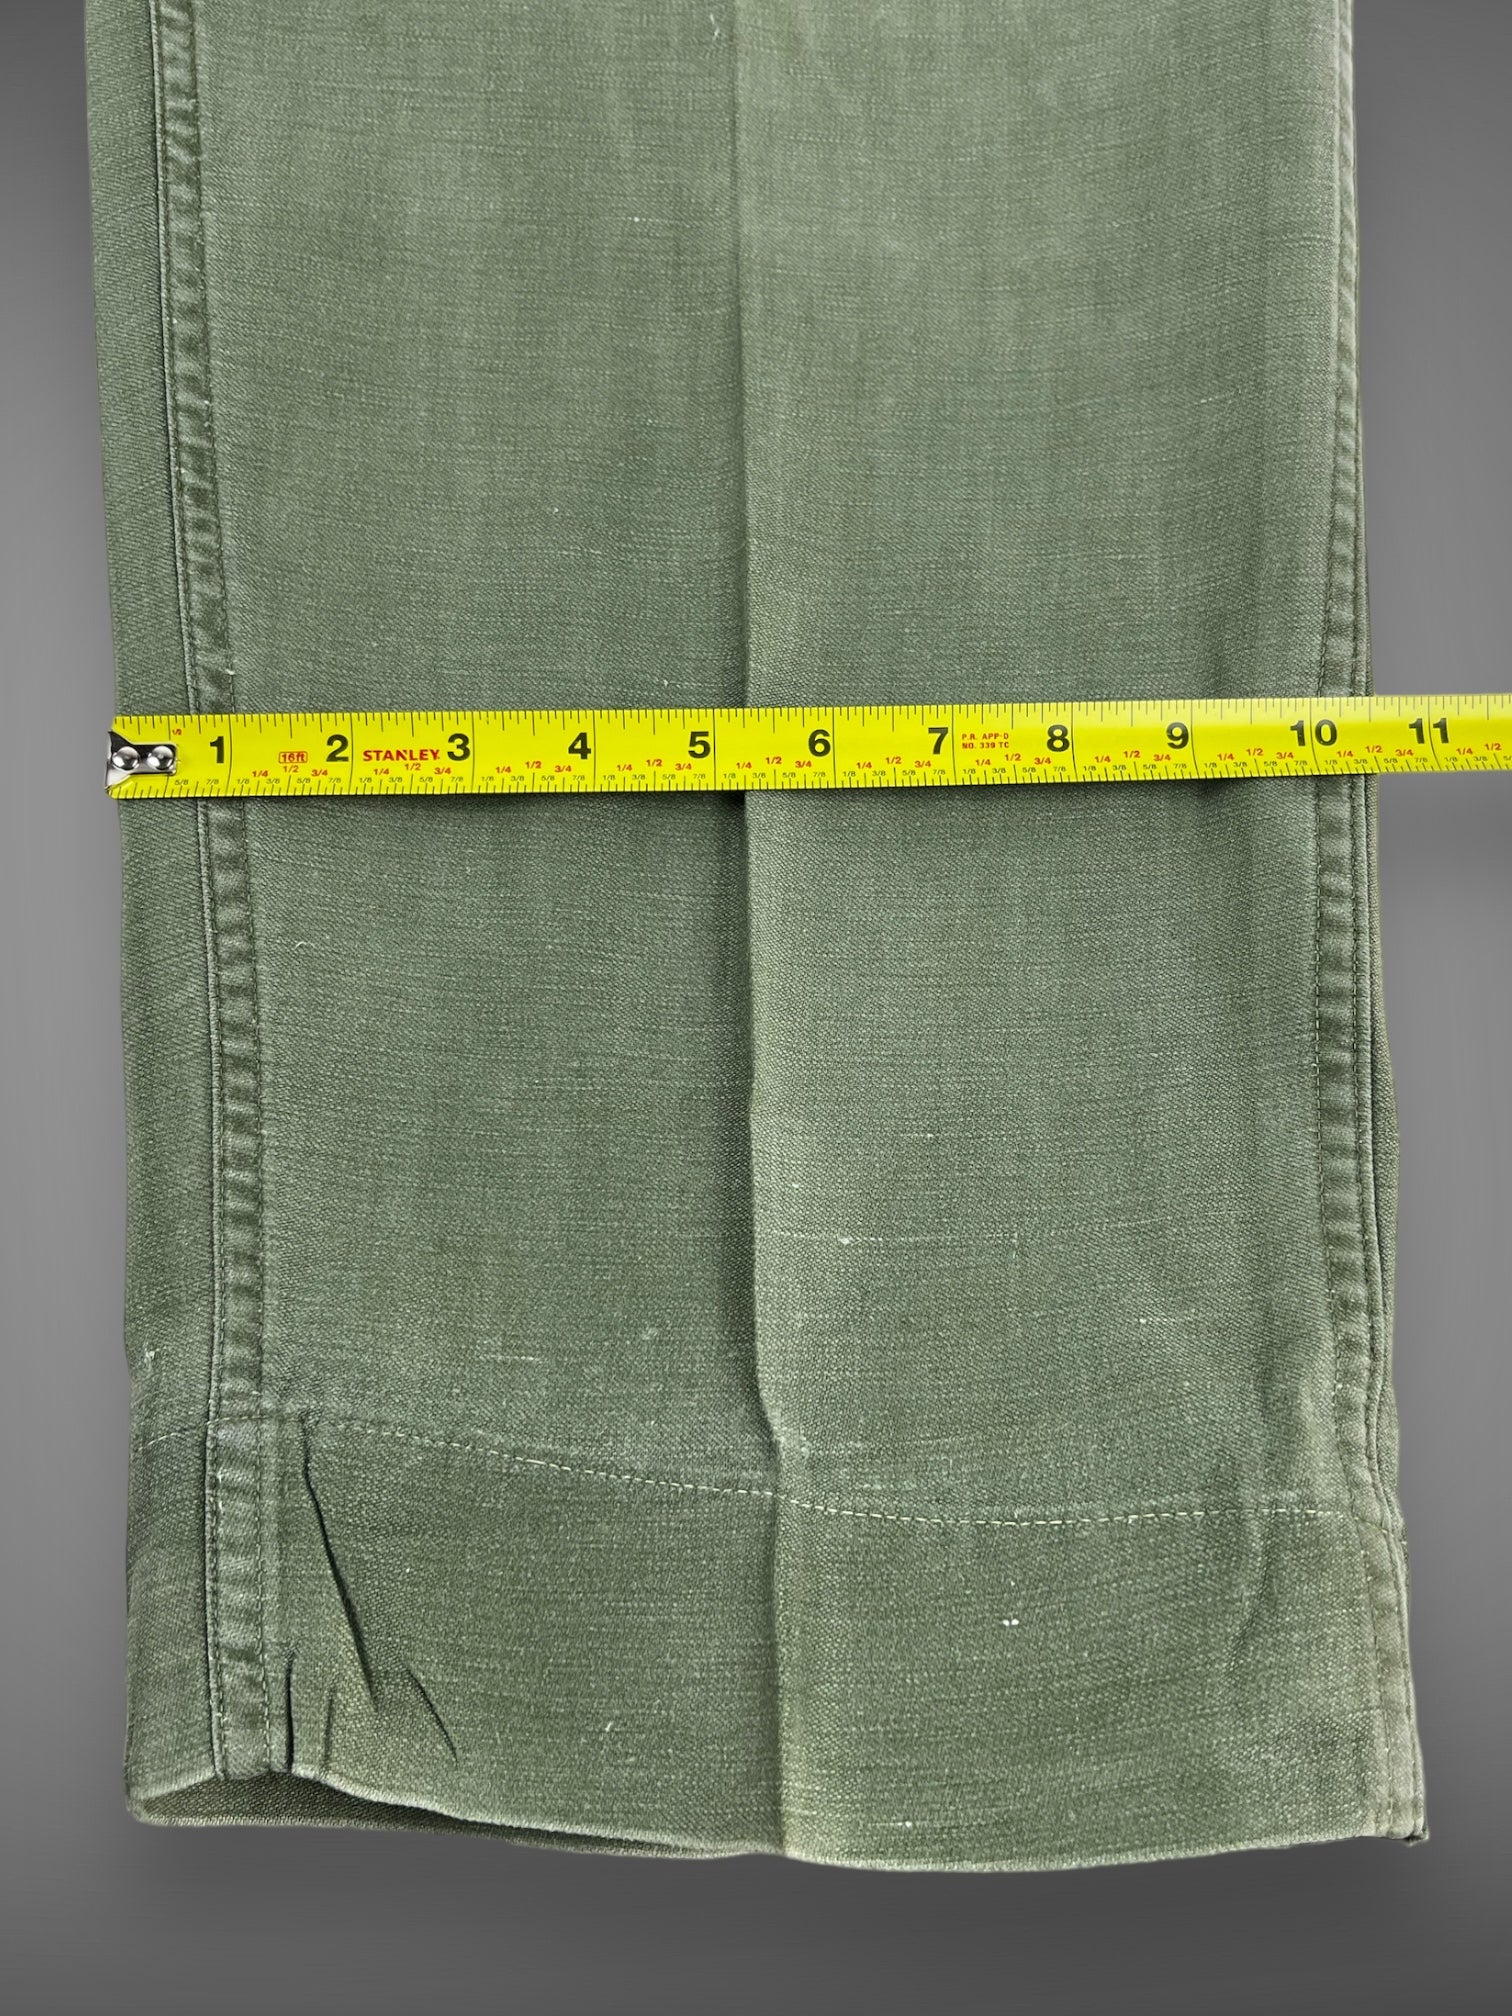 OG107 type 1 button fly military pants 34x29.5”